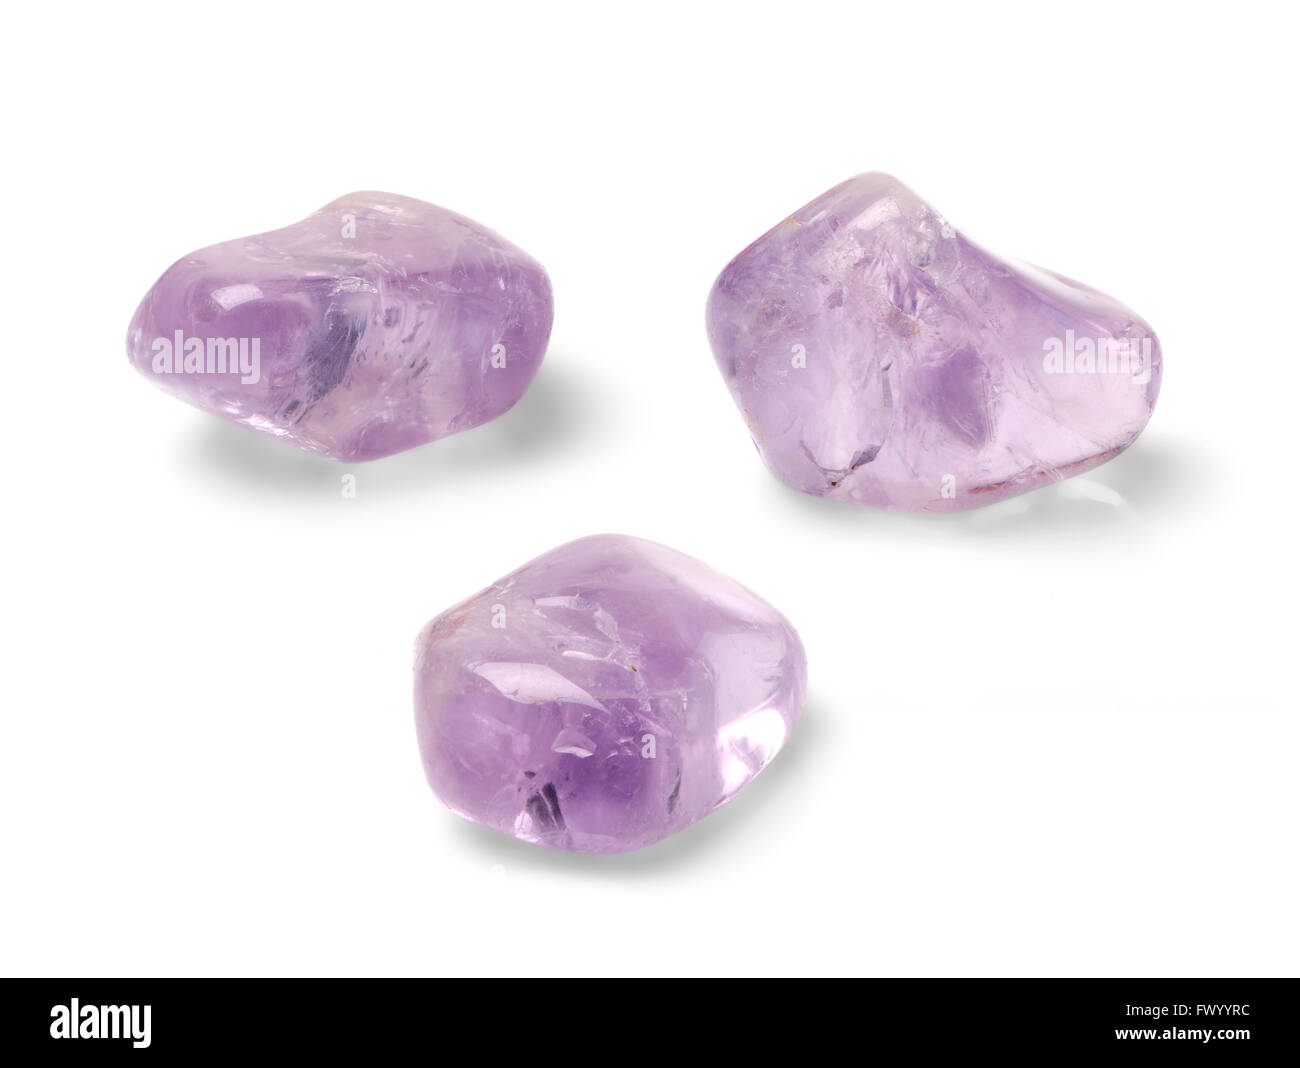 Amethyst shot from three angles isolated on white background. Stock Photo